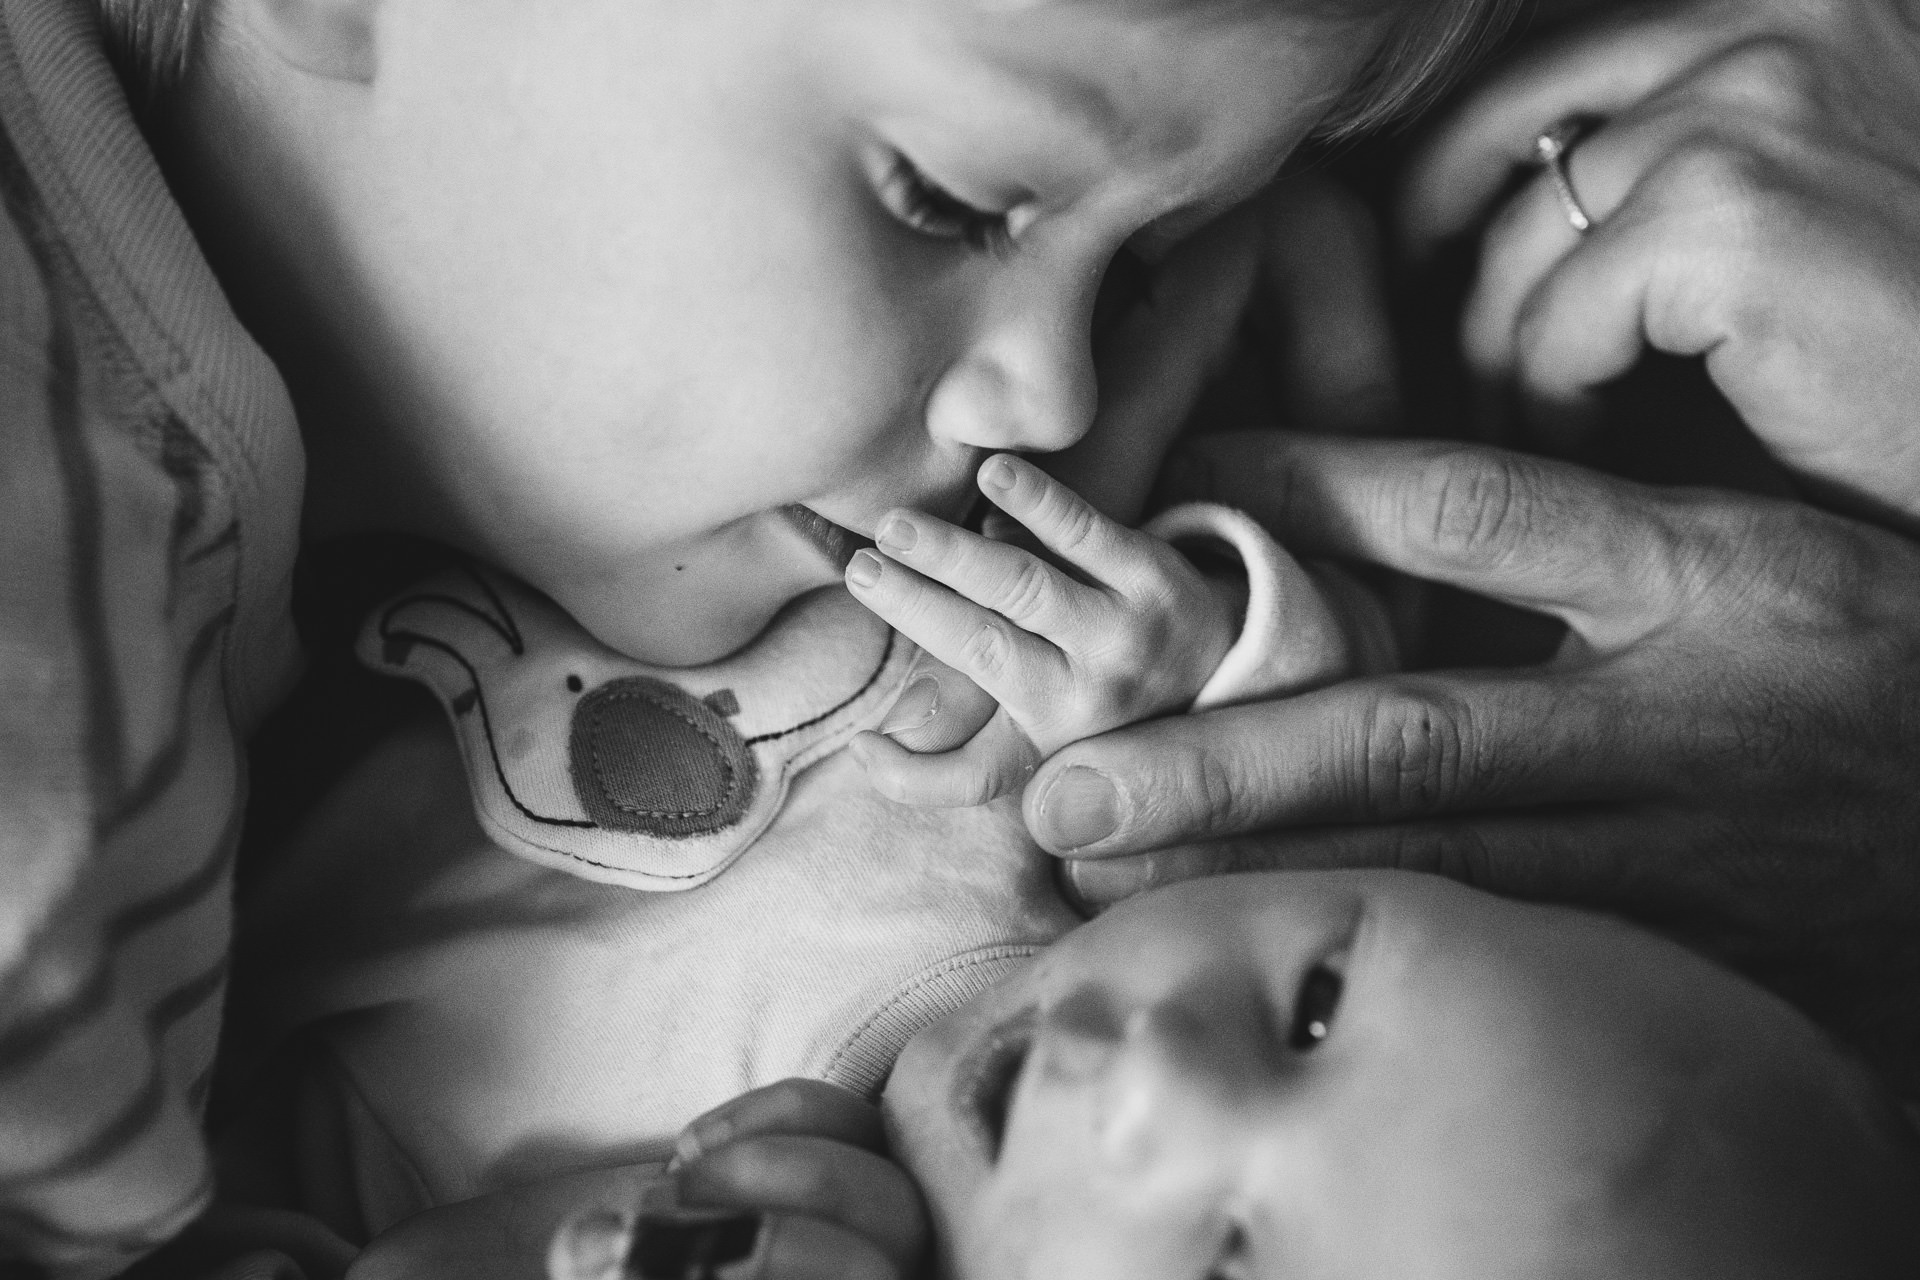 A young boy kissing a newborn baby's hand during a photo session